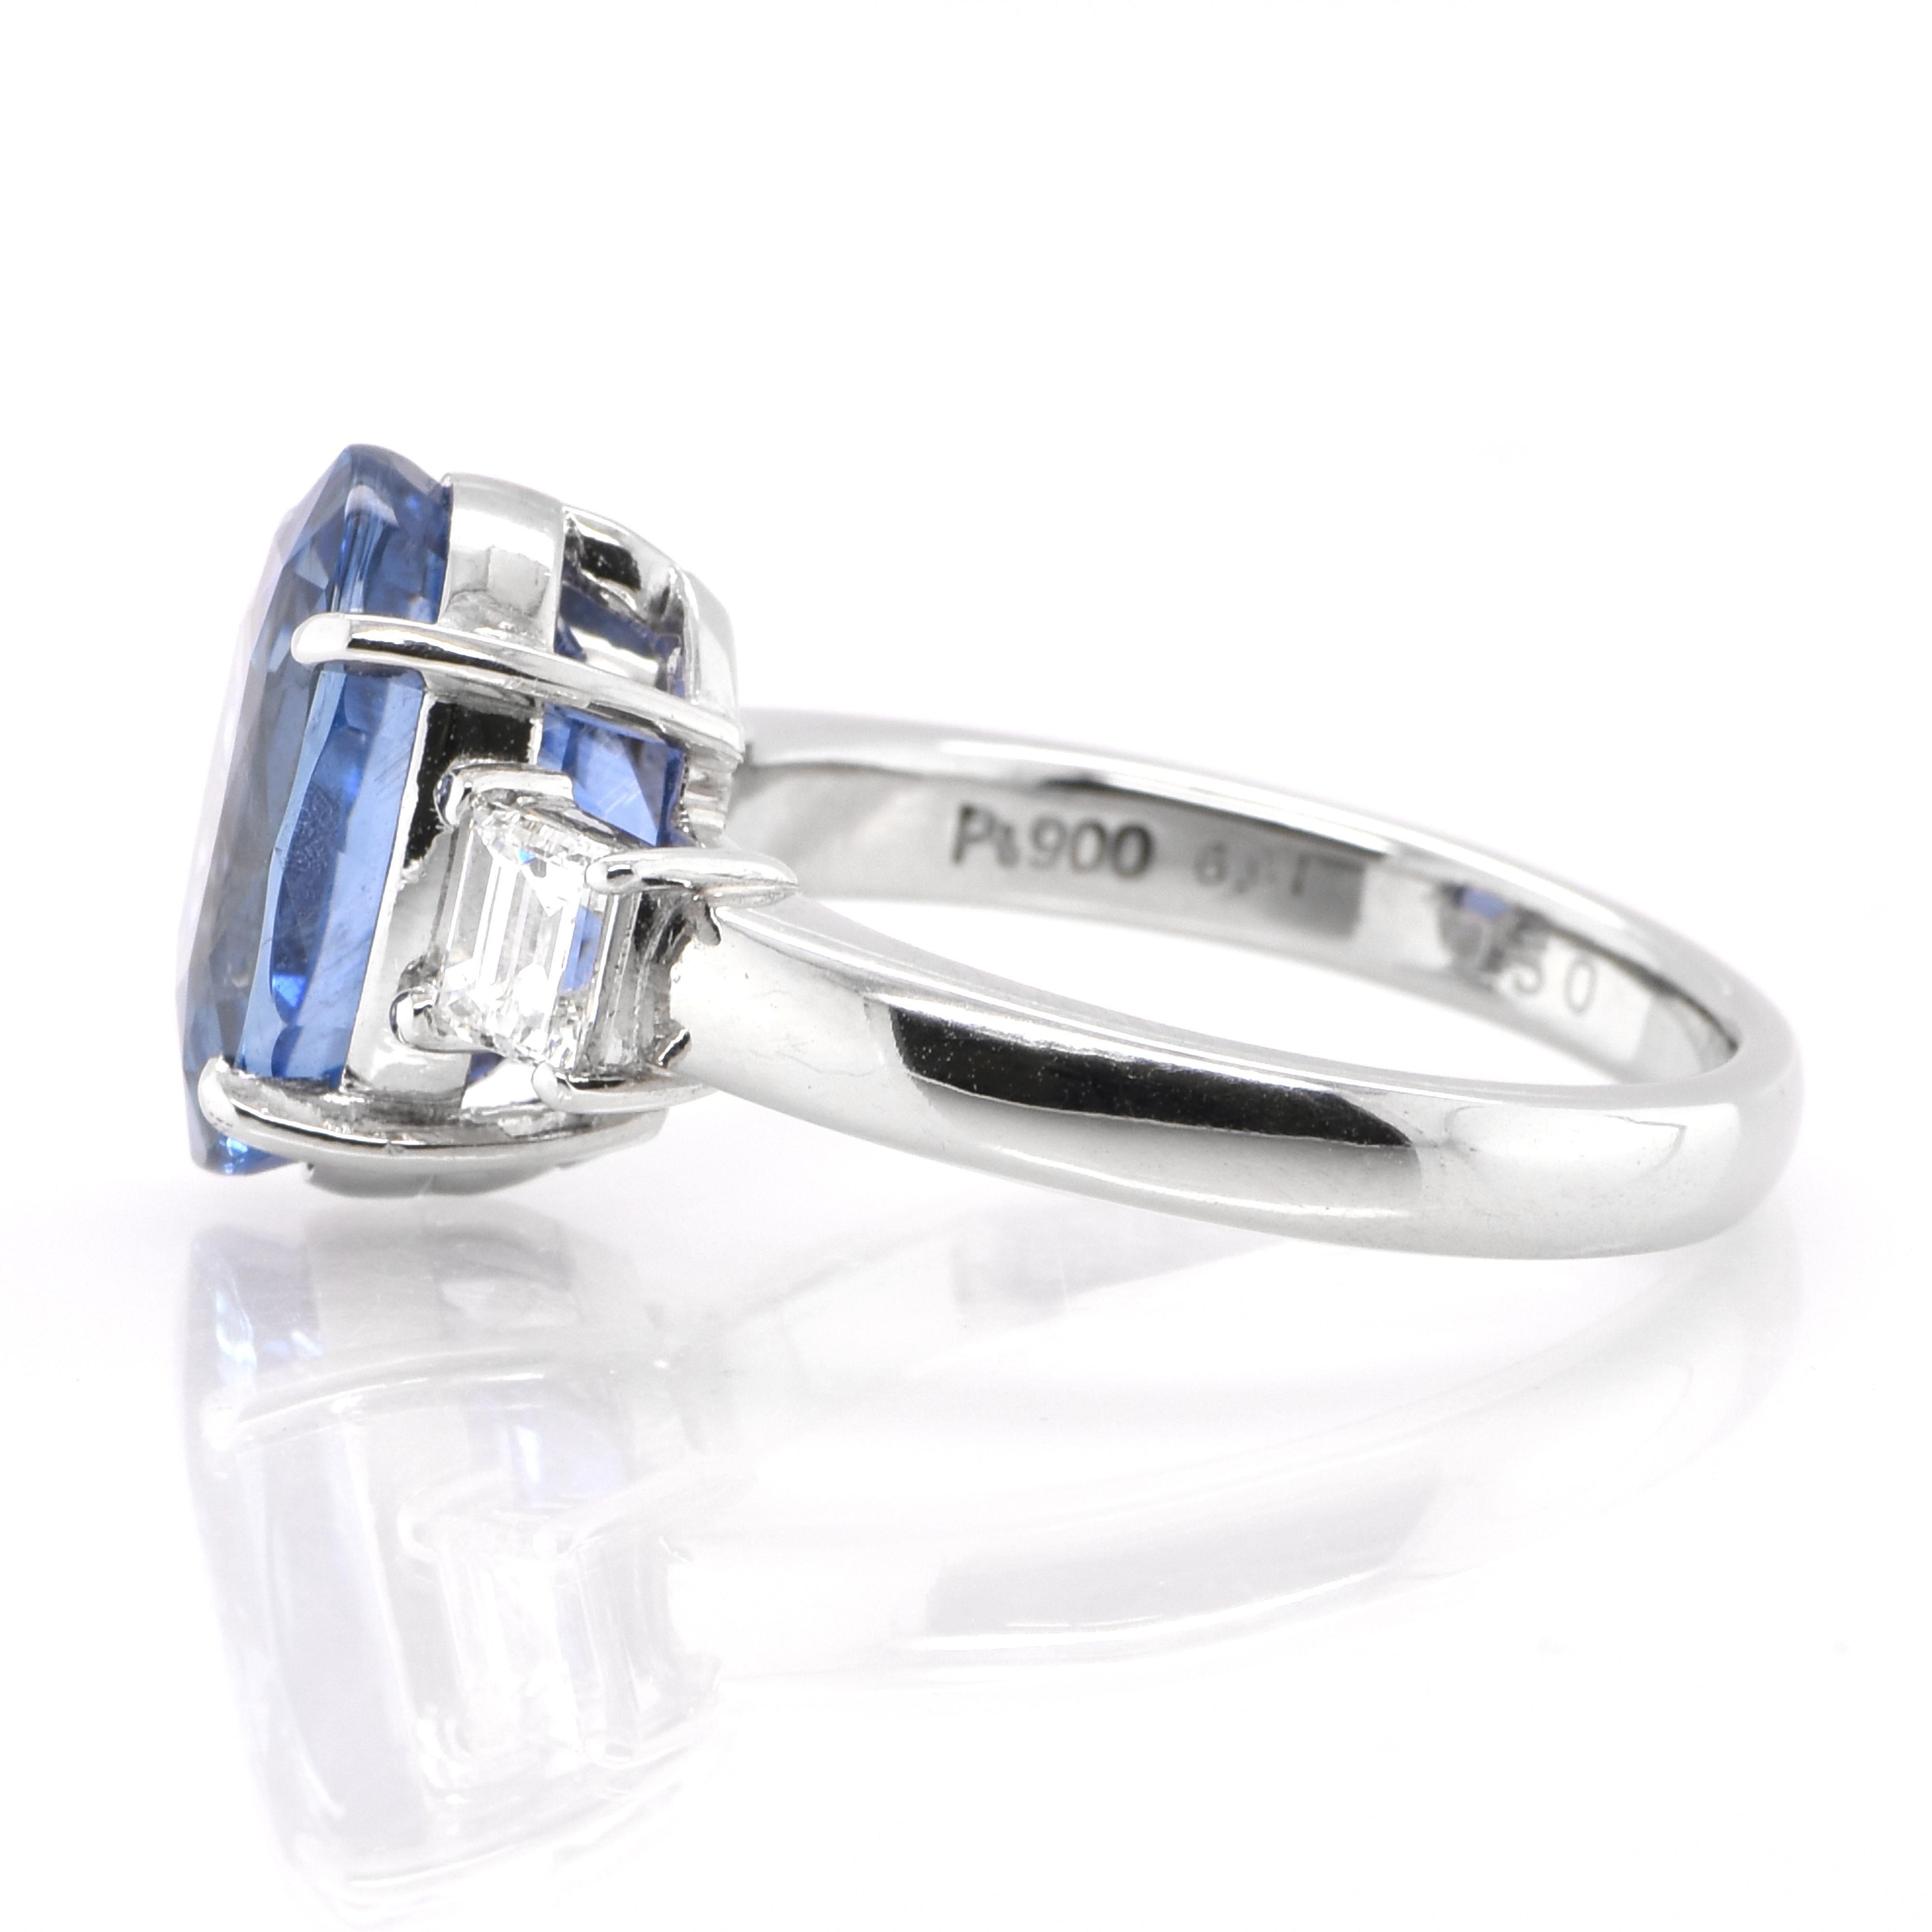 Oval Cut GIA Certified 6.01 Carat, Madagascar Unheated Sapphire Ring Set in Platinum